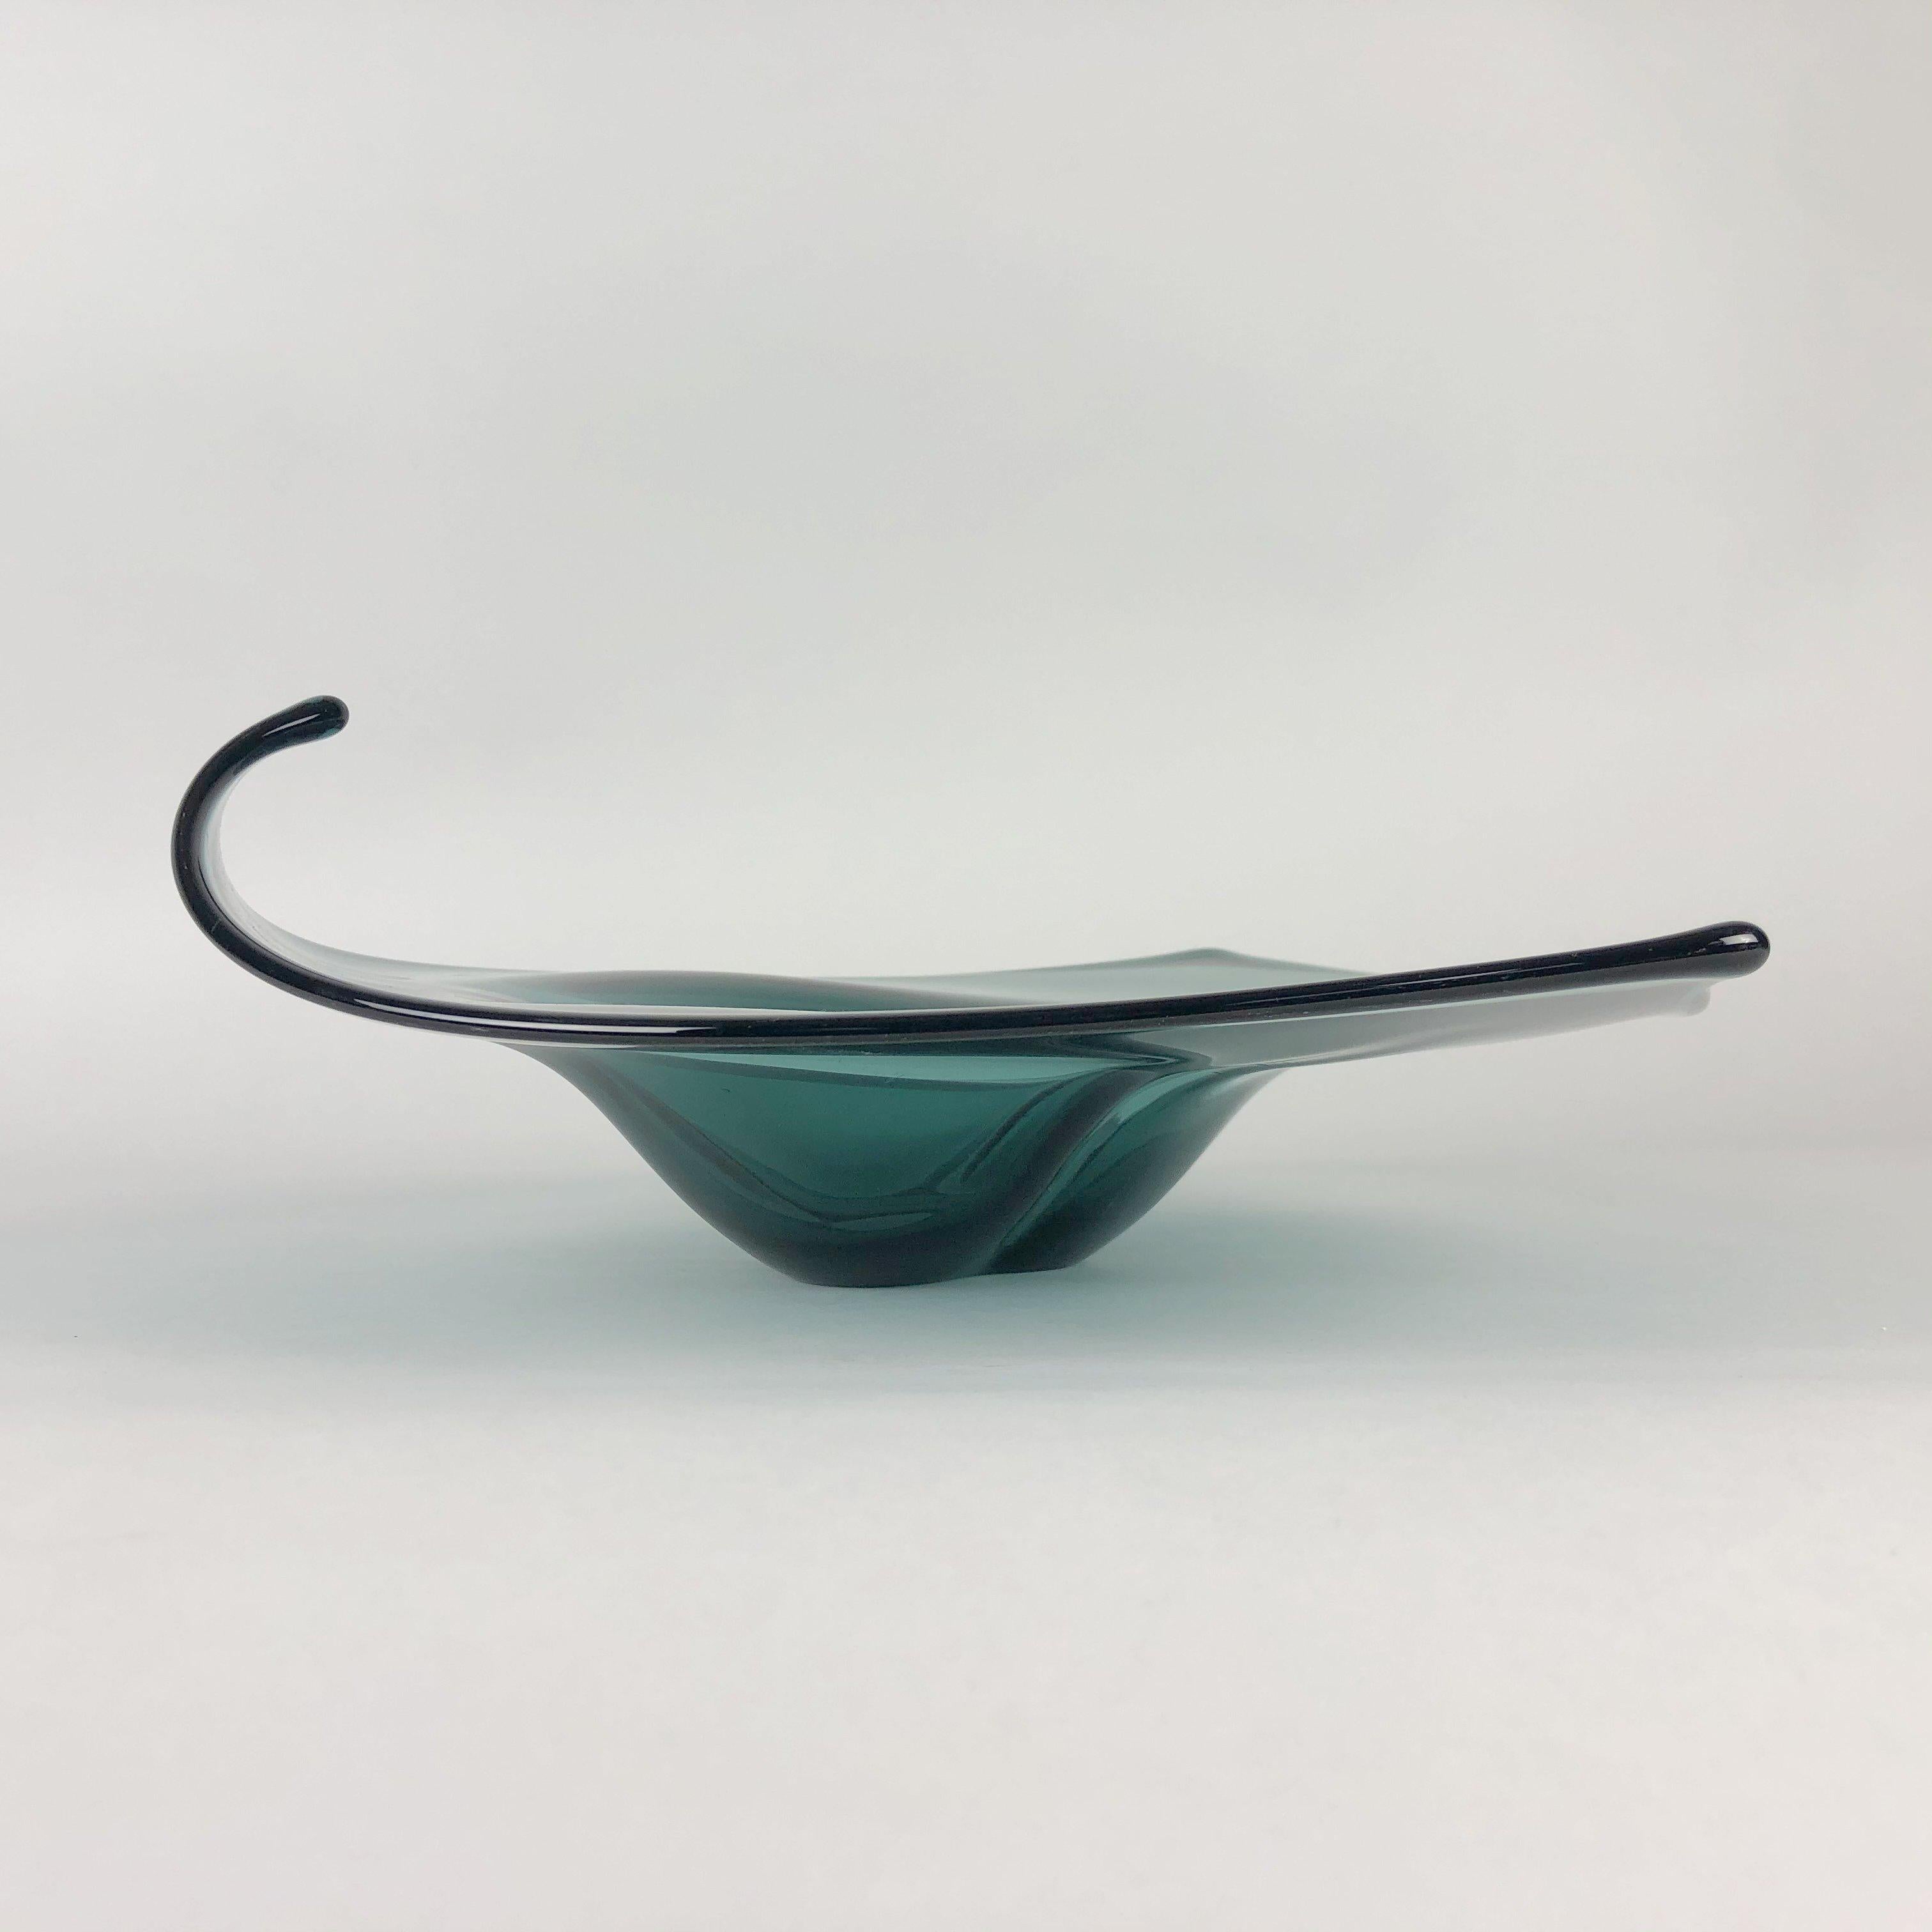 Hard to find Bohemian art glass bowl in a shape of a triangle from former Czechoslovakia will uplift any interior.
The bowl is 6 cm (2.36 inch) high at the lowest point, 12 cm (4.72 inch) high at the highest point and 37 cm (14.5 inch) wide at the